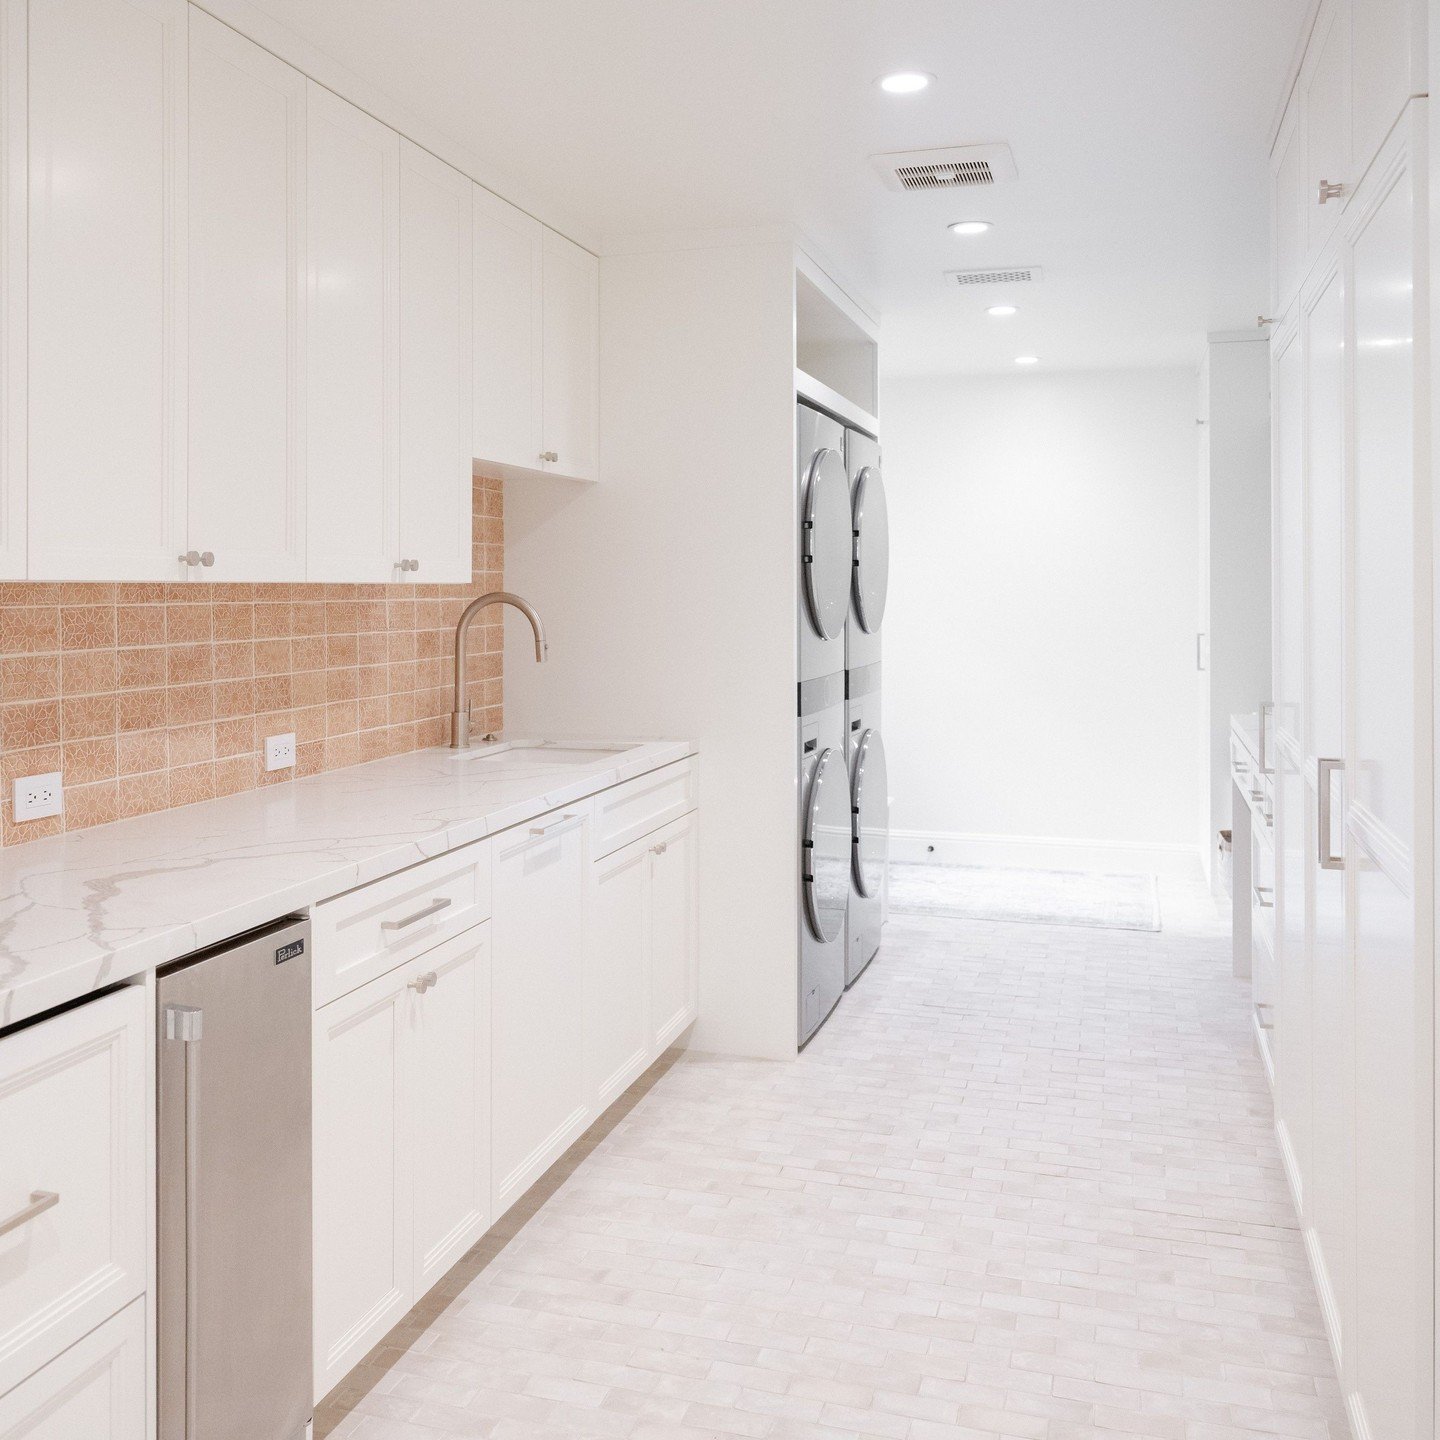 Designing this custom mud room/laundry room was essential for my client&mdash;a bustling family of six! Featuring a spacious, uncluttered layout with lots of storage, tackling laundry tasks here is a breeze. Now time to add decor! ⁠
⁠
#BeverlyHillsHa